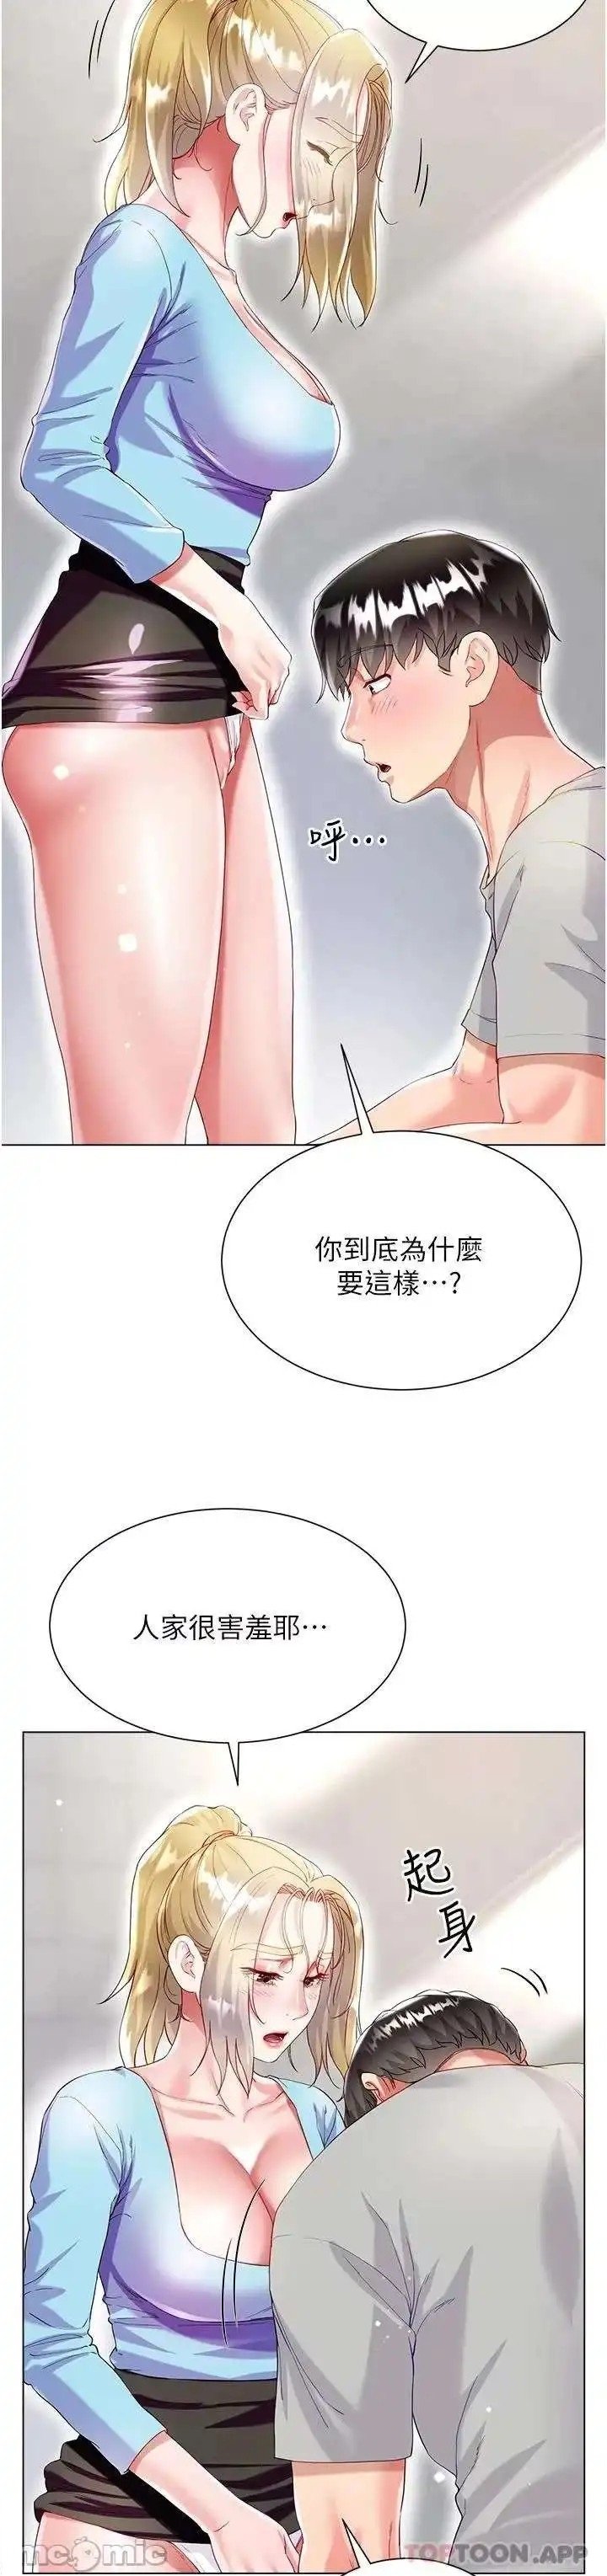 skirt-of-brothers-wife-raw-chap-34-22